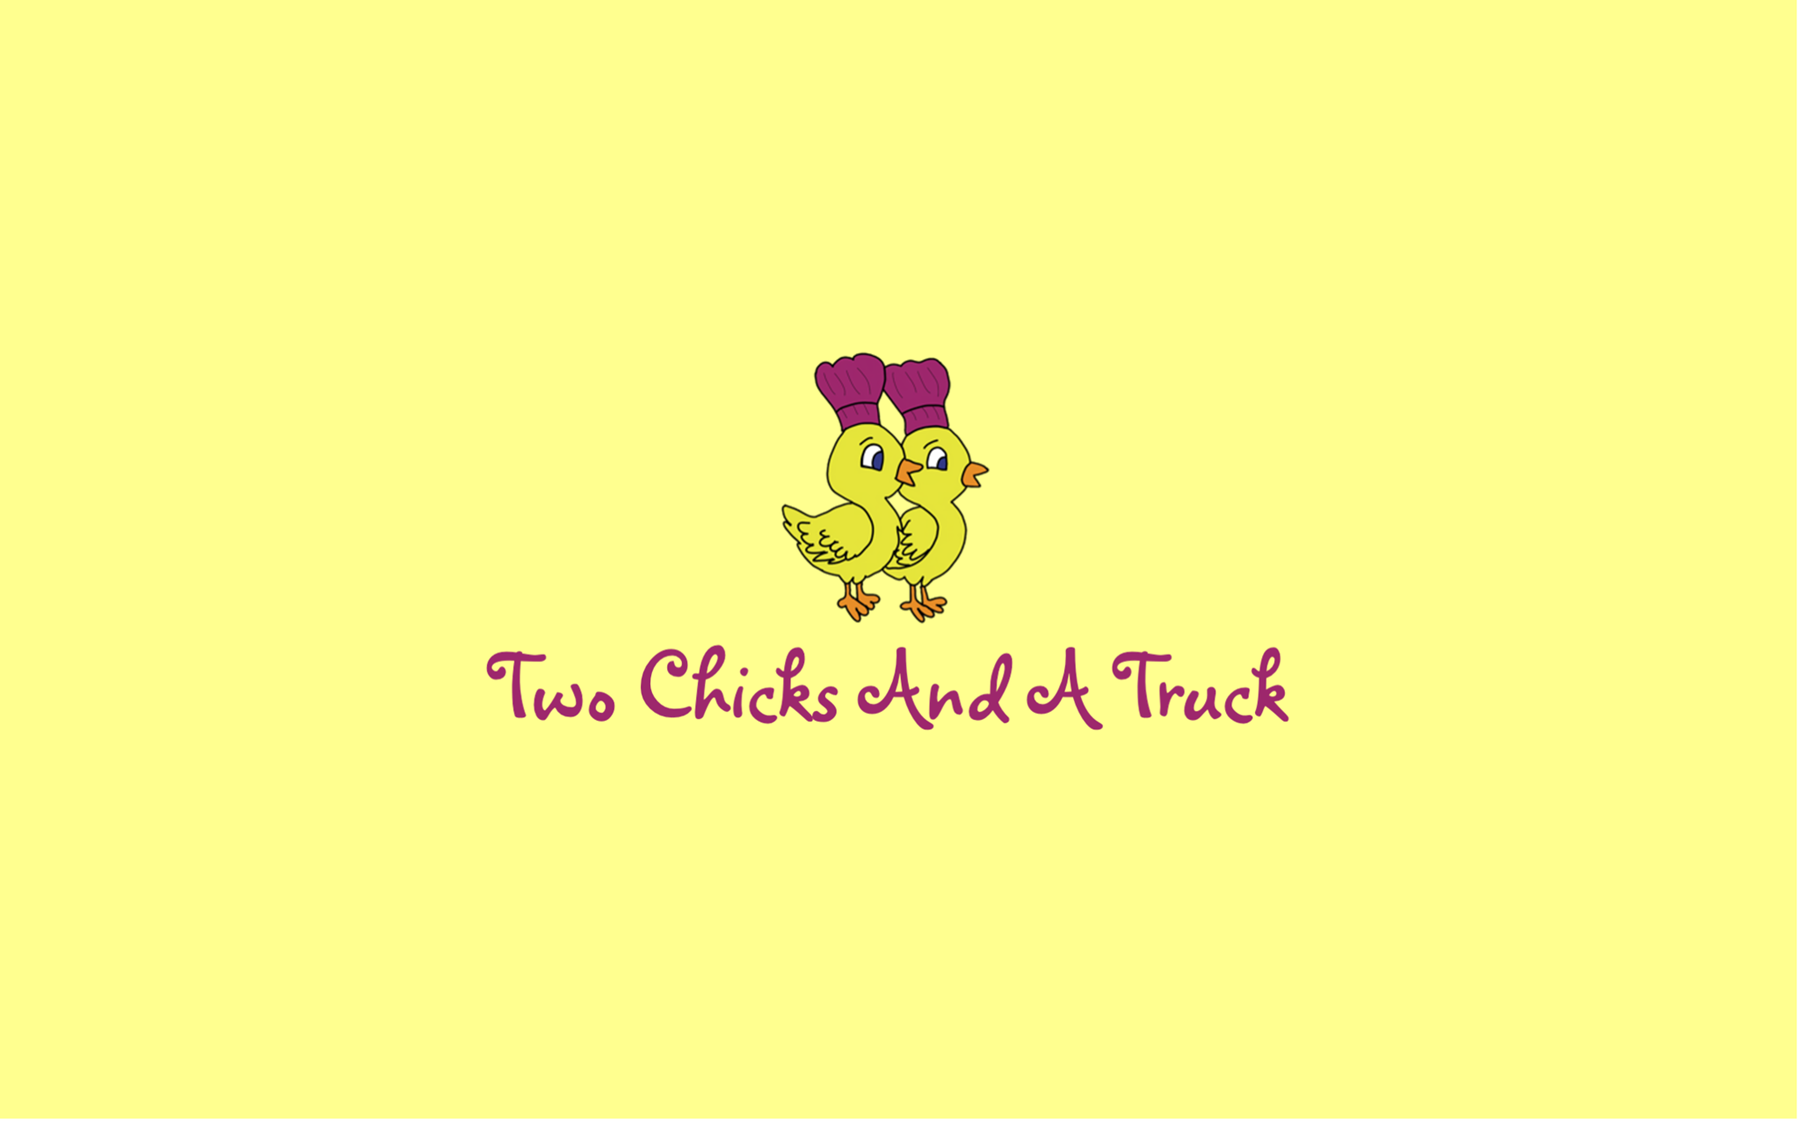 Two Chicks and A Truck